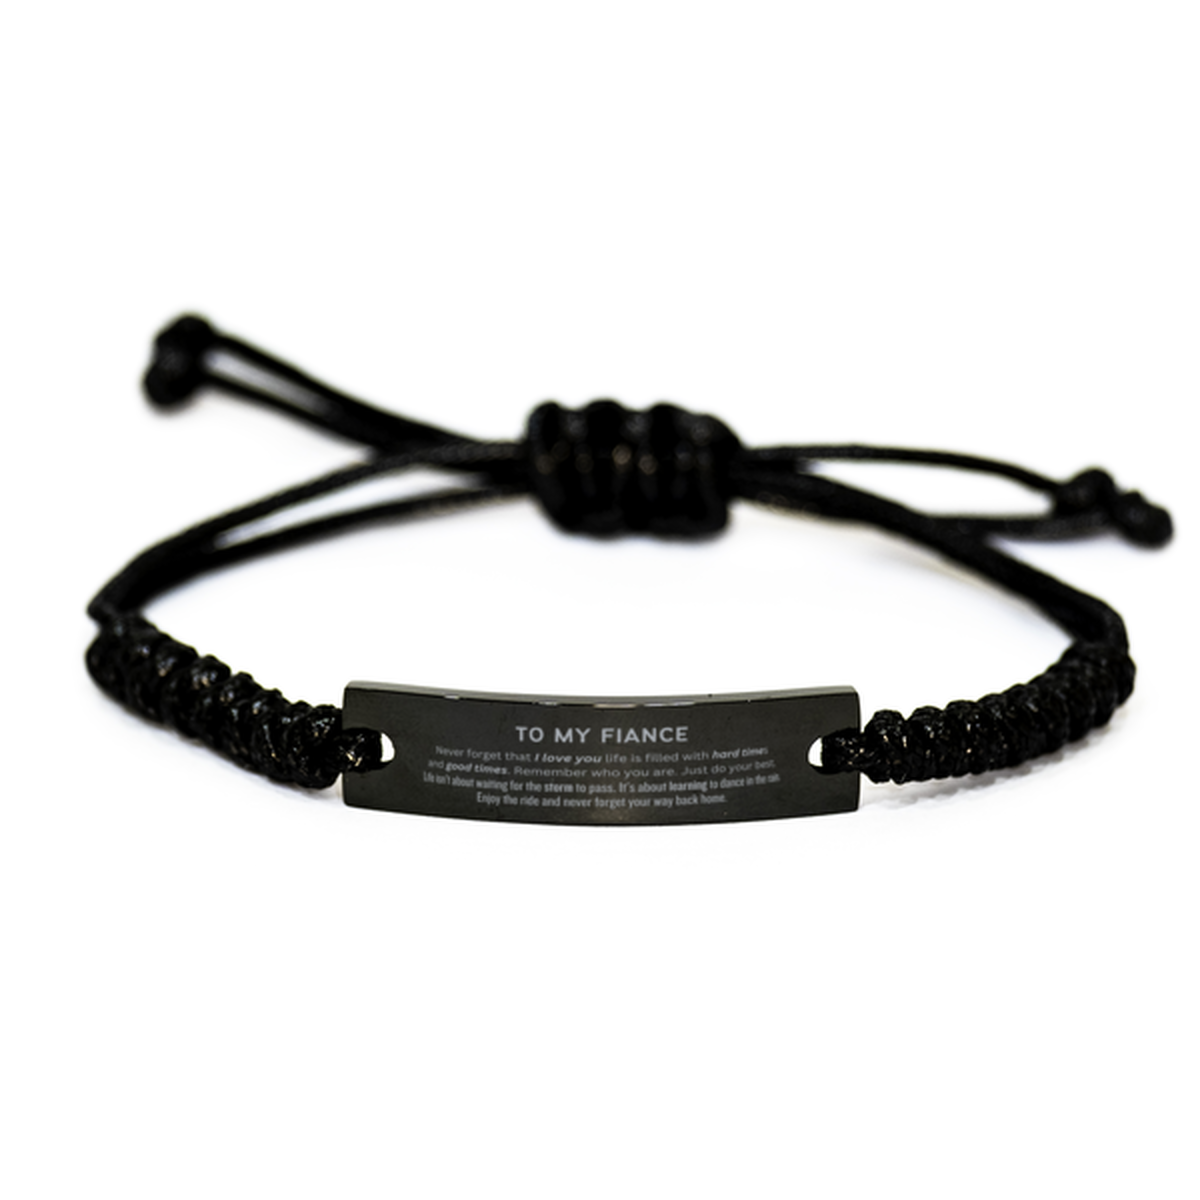 Christmas Fiance Black Rope Bracelet Gifts, To My Fiance Birthday Thank You Gifts For Fiance, Graduation Unique Gifts For Fiance To My Fiance Never forget that I love you life is filled with hard times and good times. Remember who you are. Just do your be